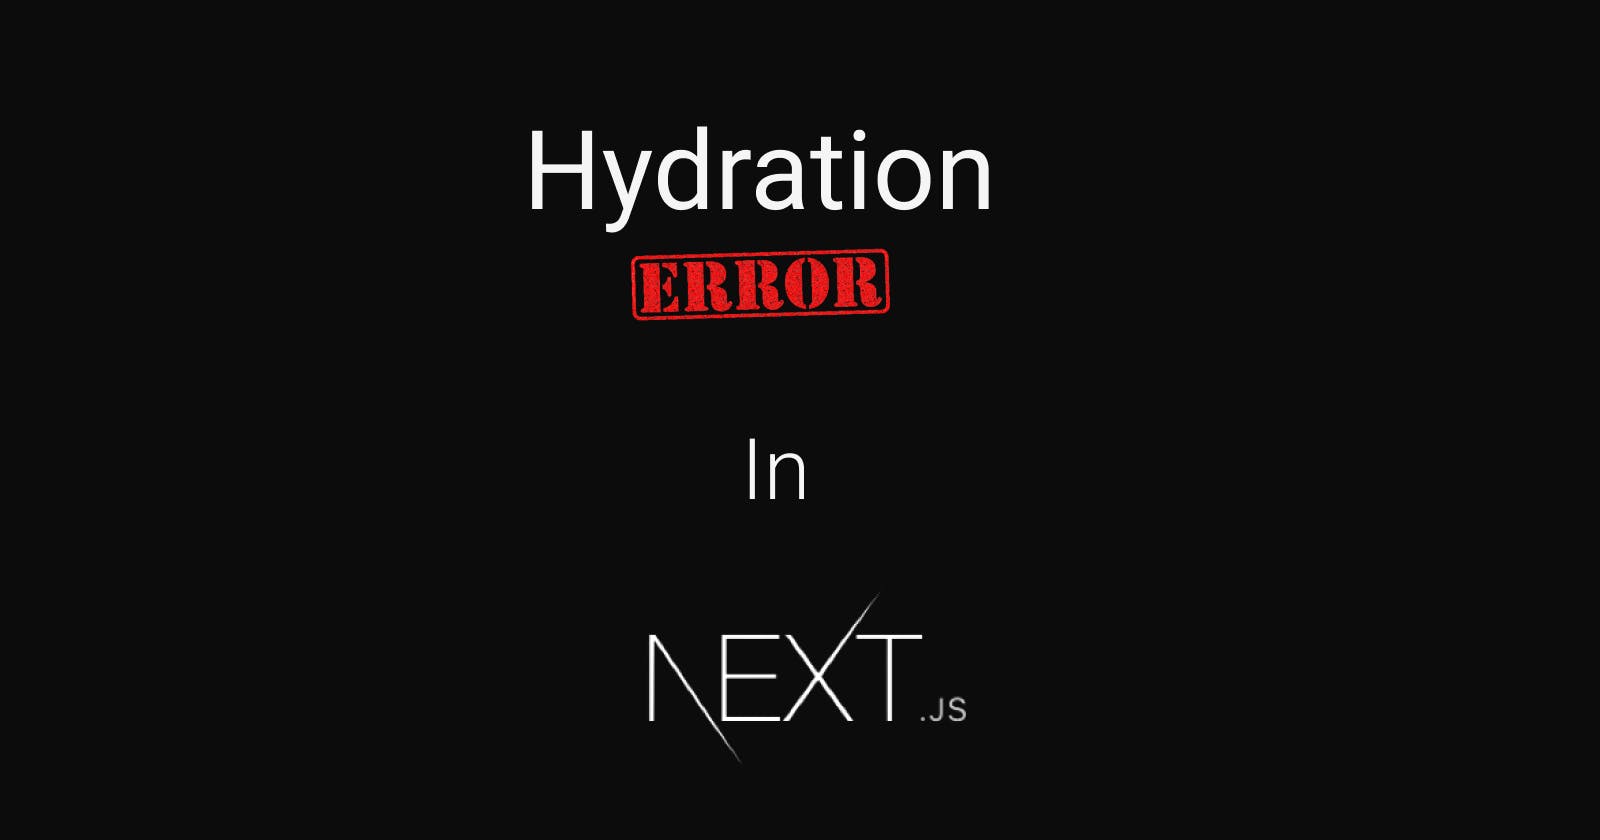 How to solve hydration error in Next.js